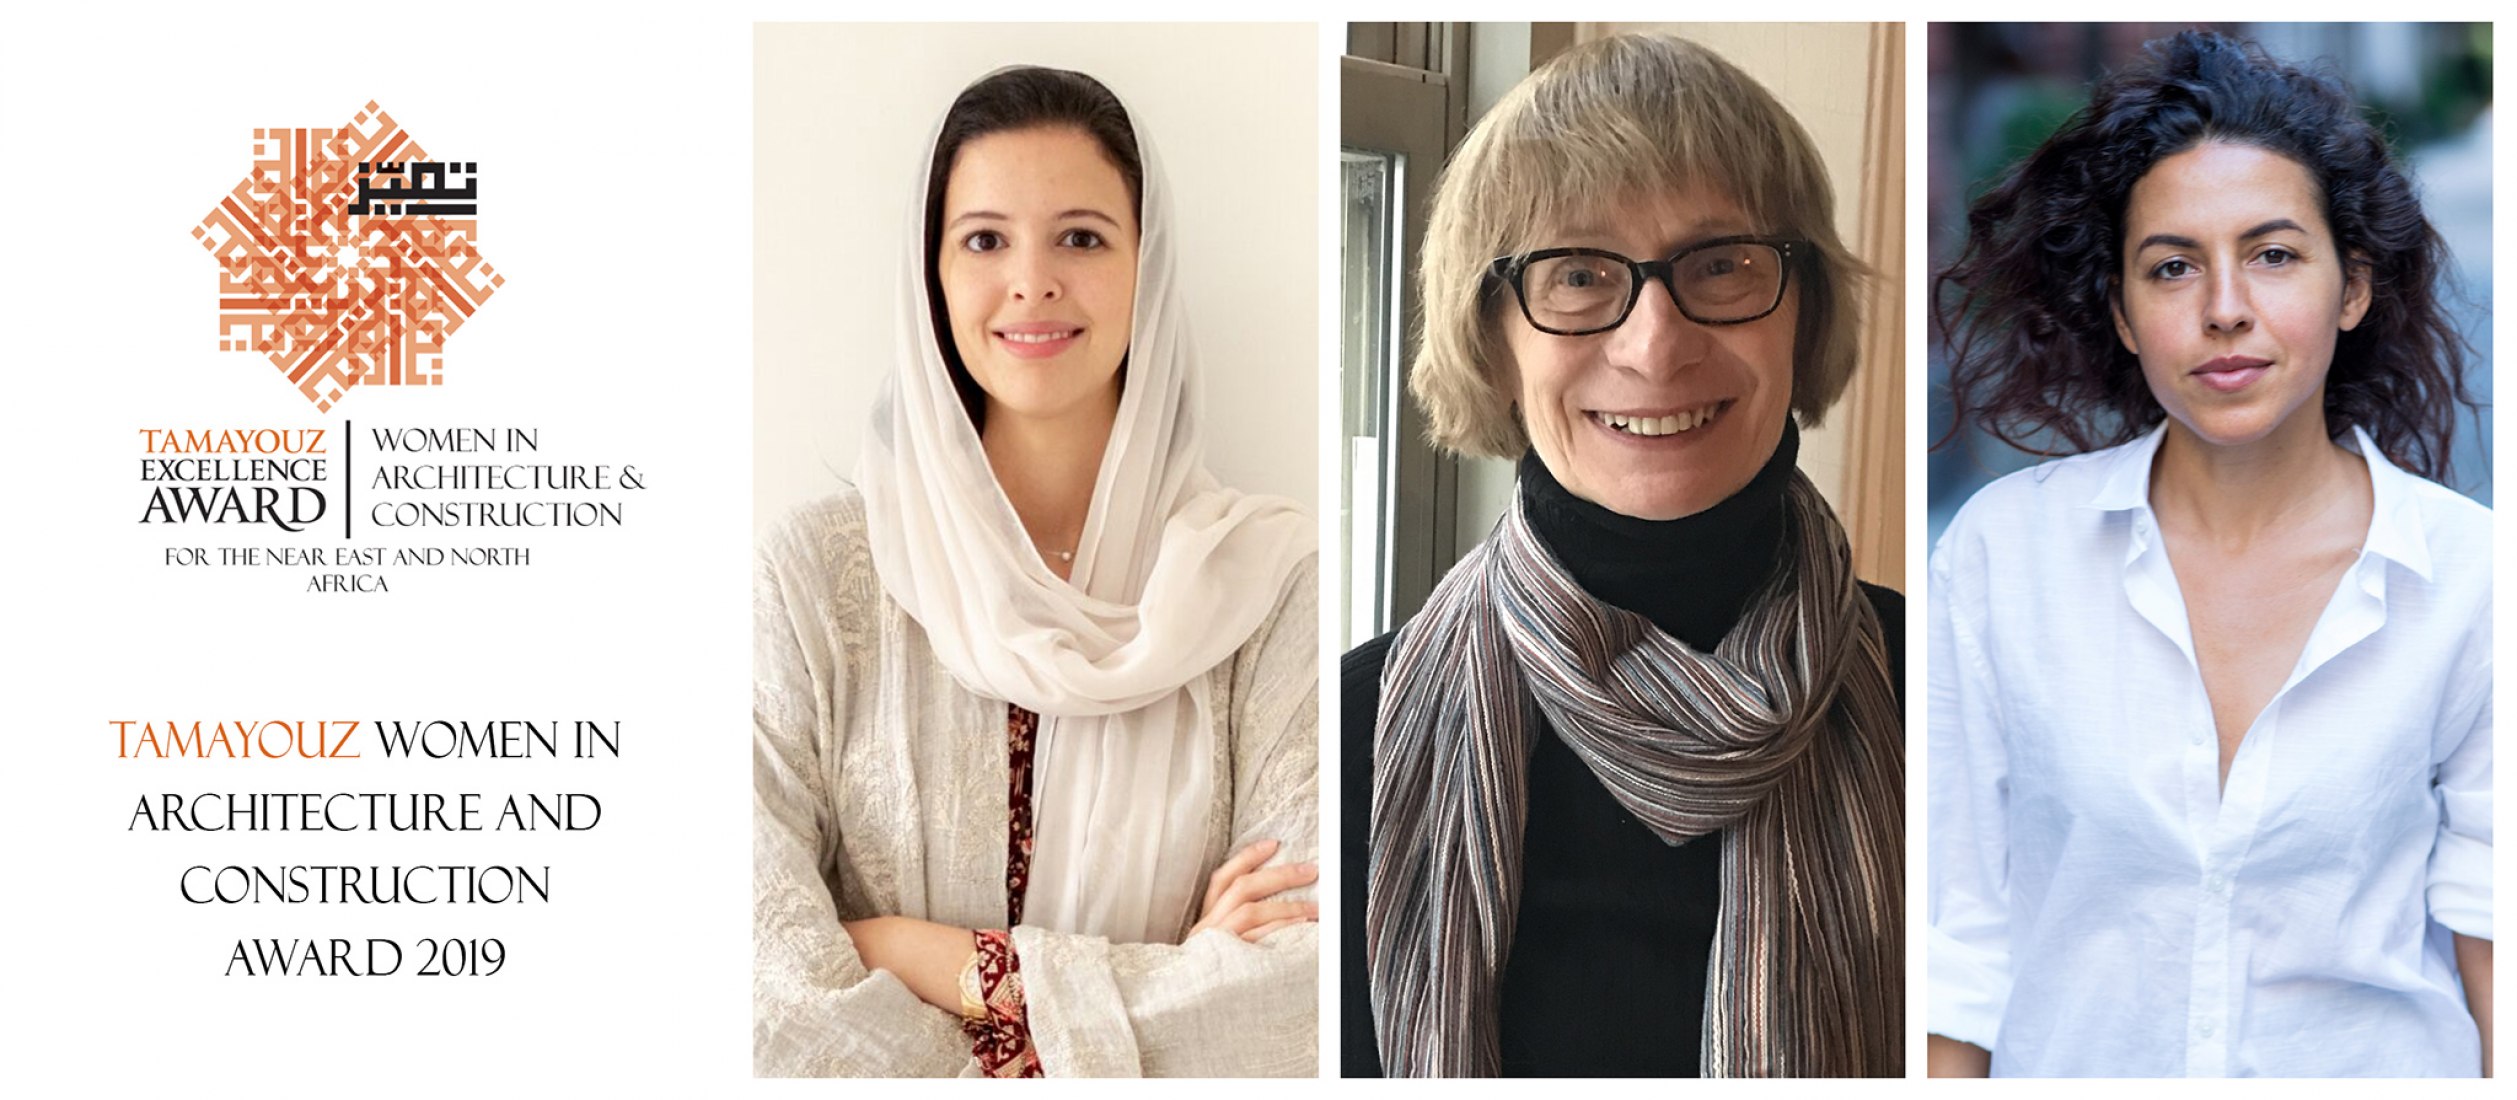 Tamayouz Excellence Award recognizes Dana AlAmri, Dr. Zeynep Celik, and Shahira Fahmy as winners of the 2019 Women in Architecture and Construction Award